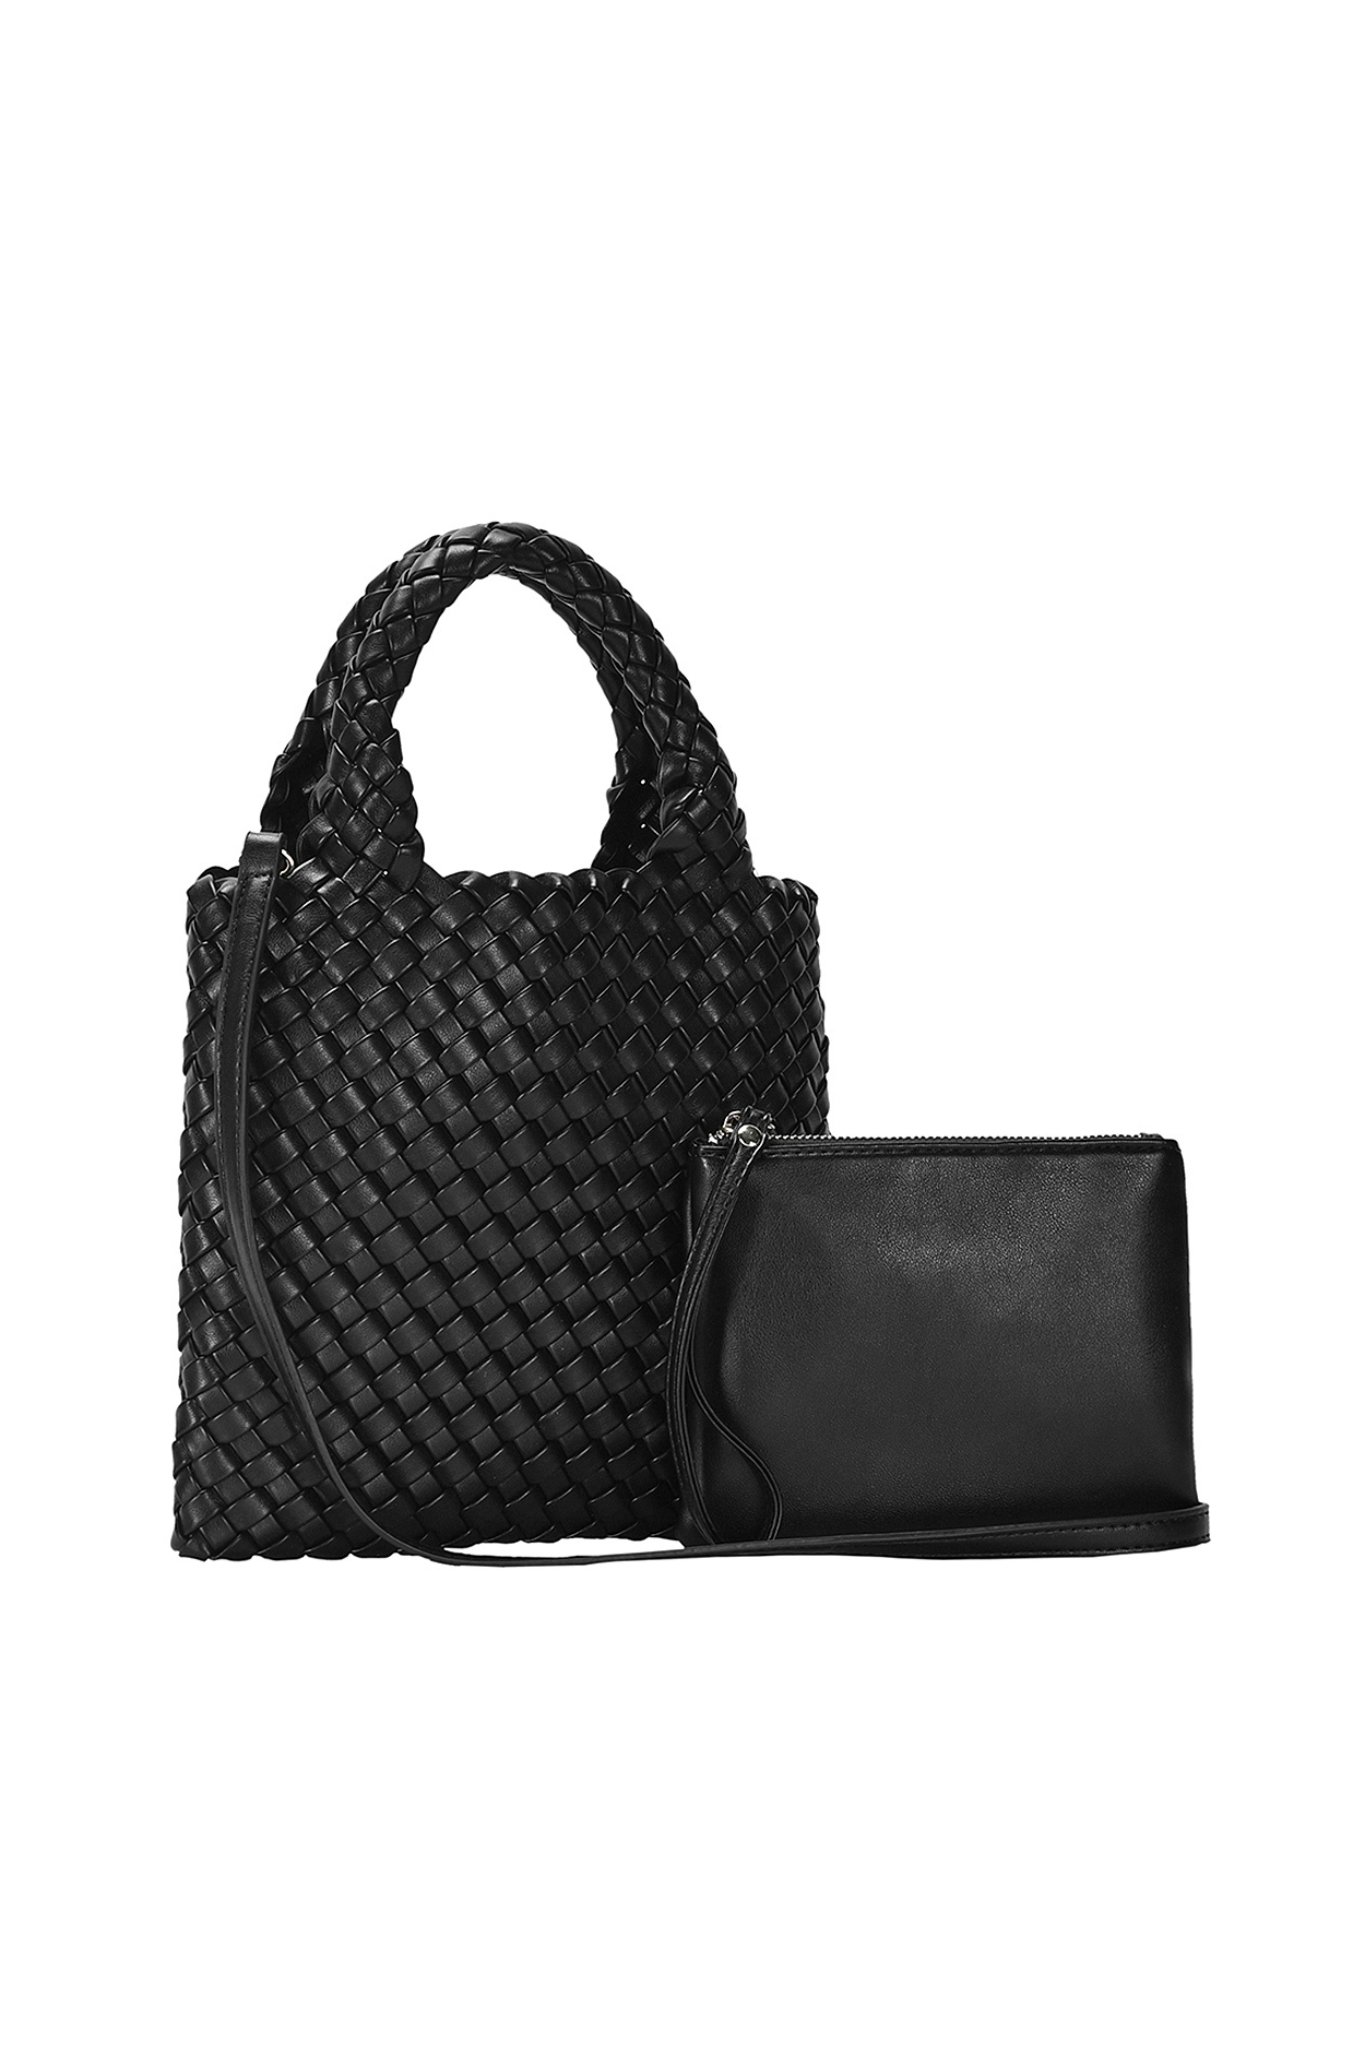 2 in 1 Woven Handle Tote Bag with Clutch Set in Black_Angle